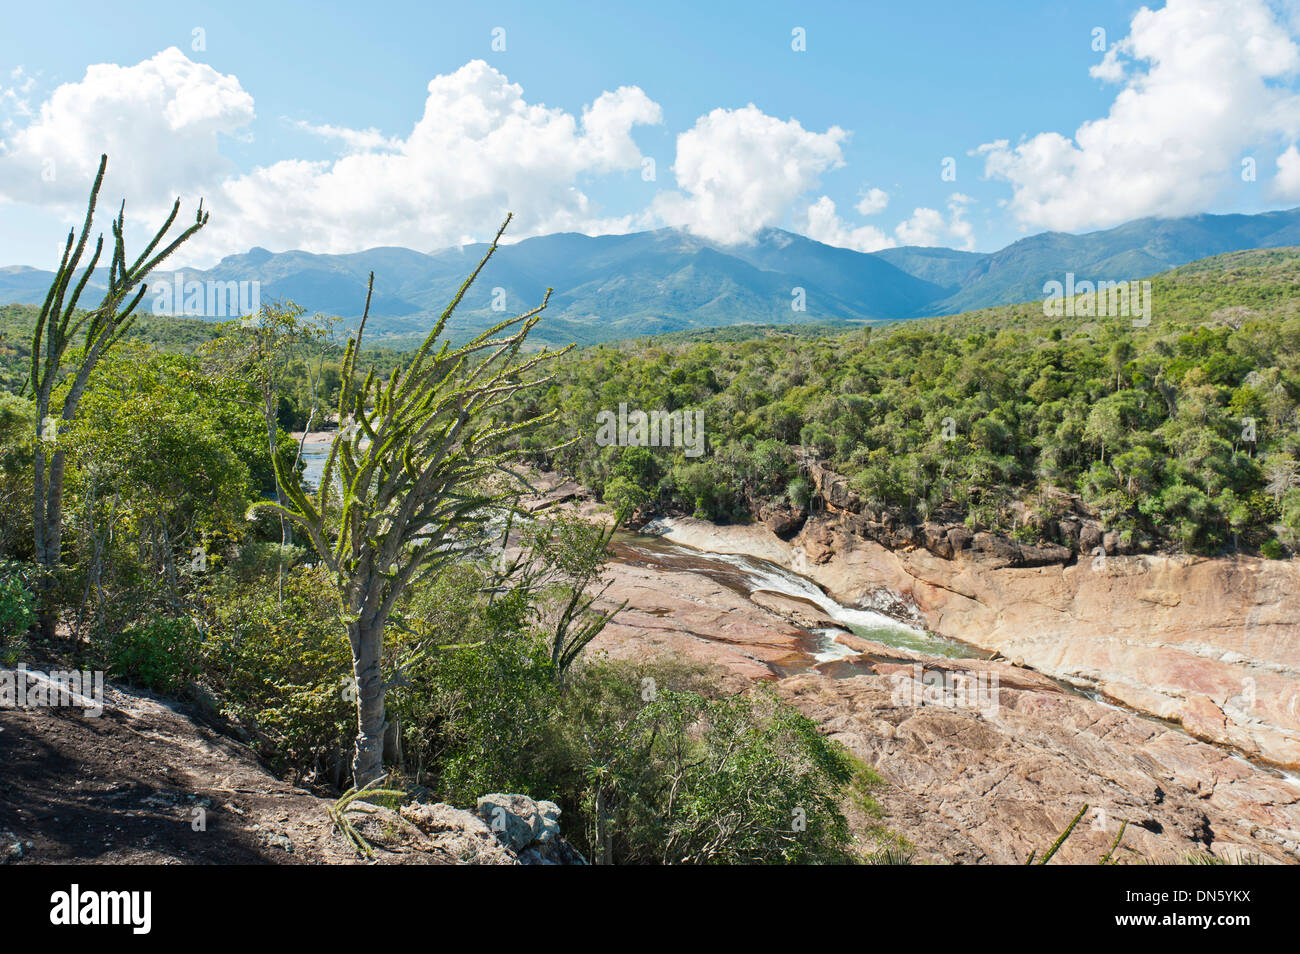 Tropical dry forest landscape with river and rocks, with Madagascan Ocotillo or Alluaudia (Alluaudia procera), Didiereaceae Stock Photo